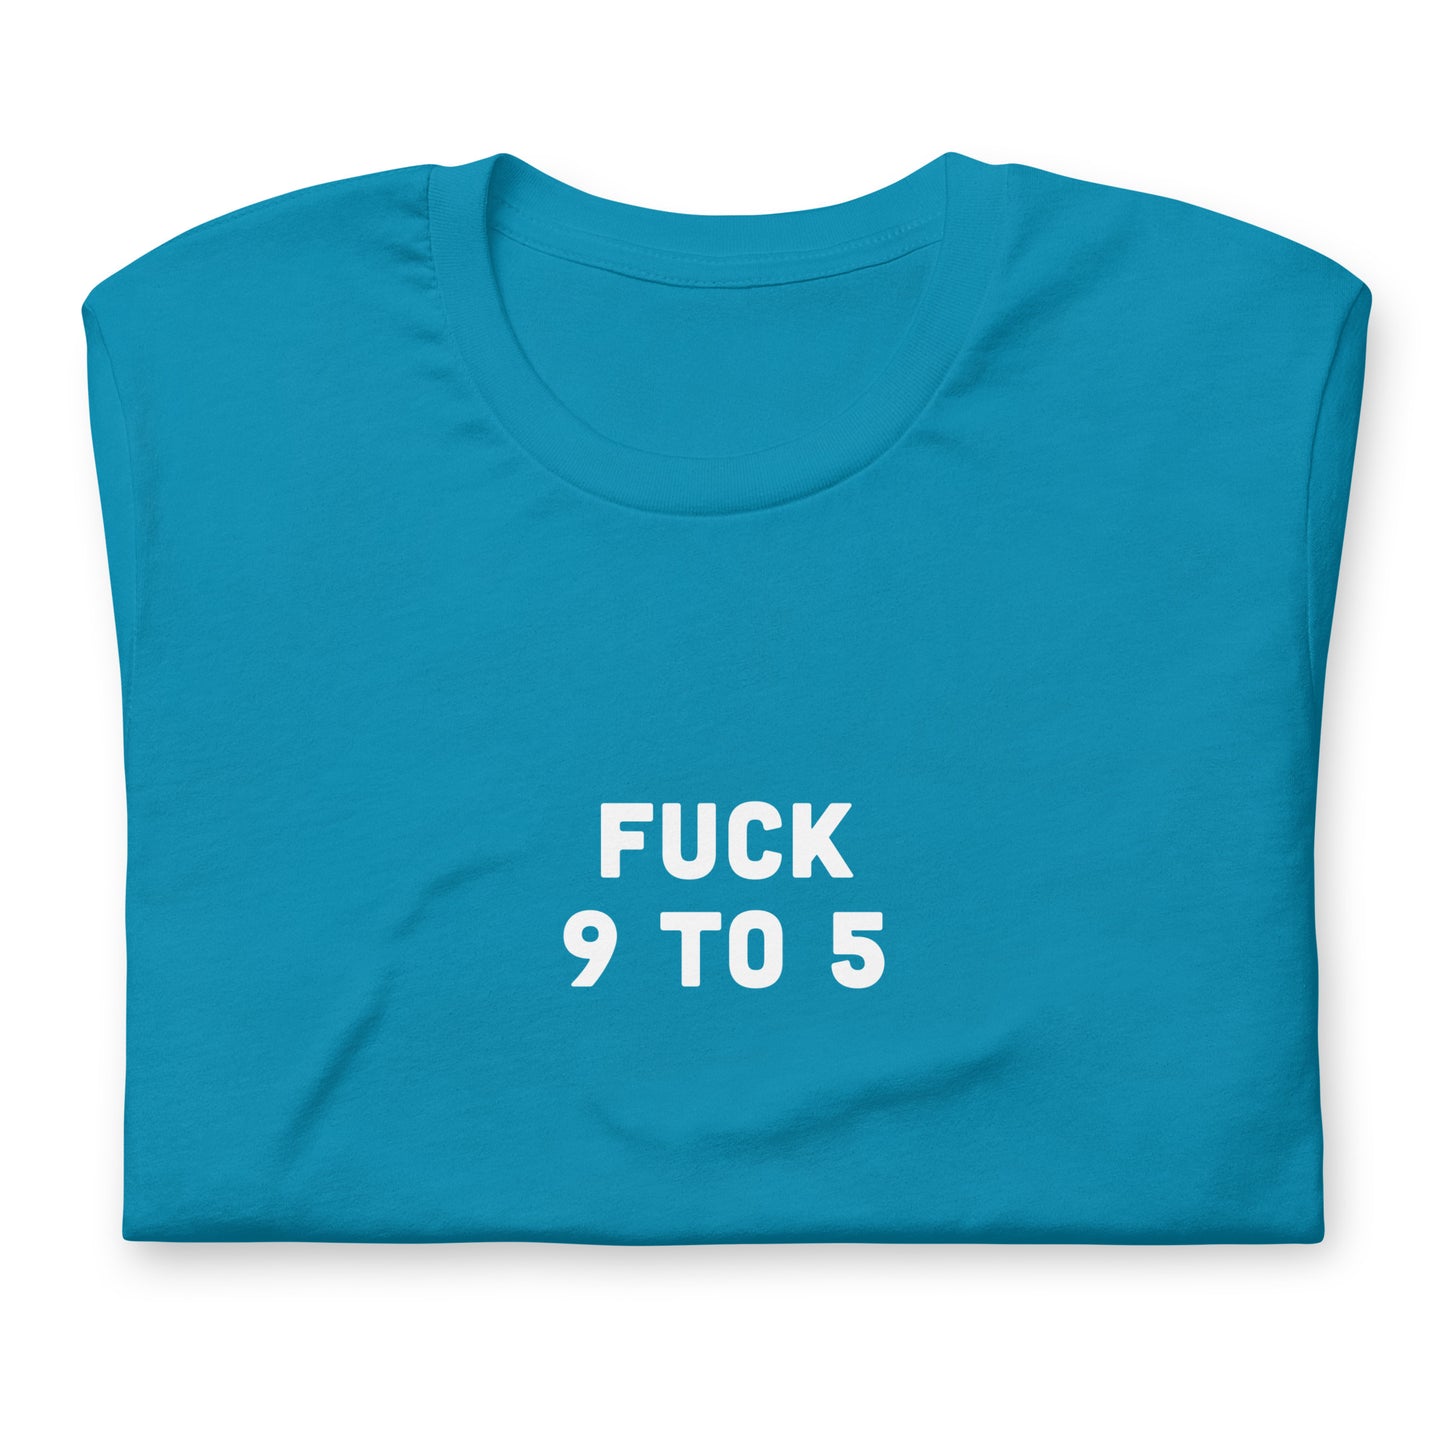 Fuck 9 To 5 T-Shirt Size M Color Navy